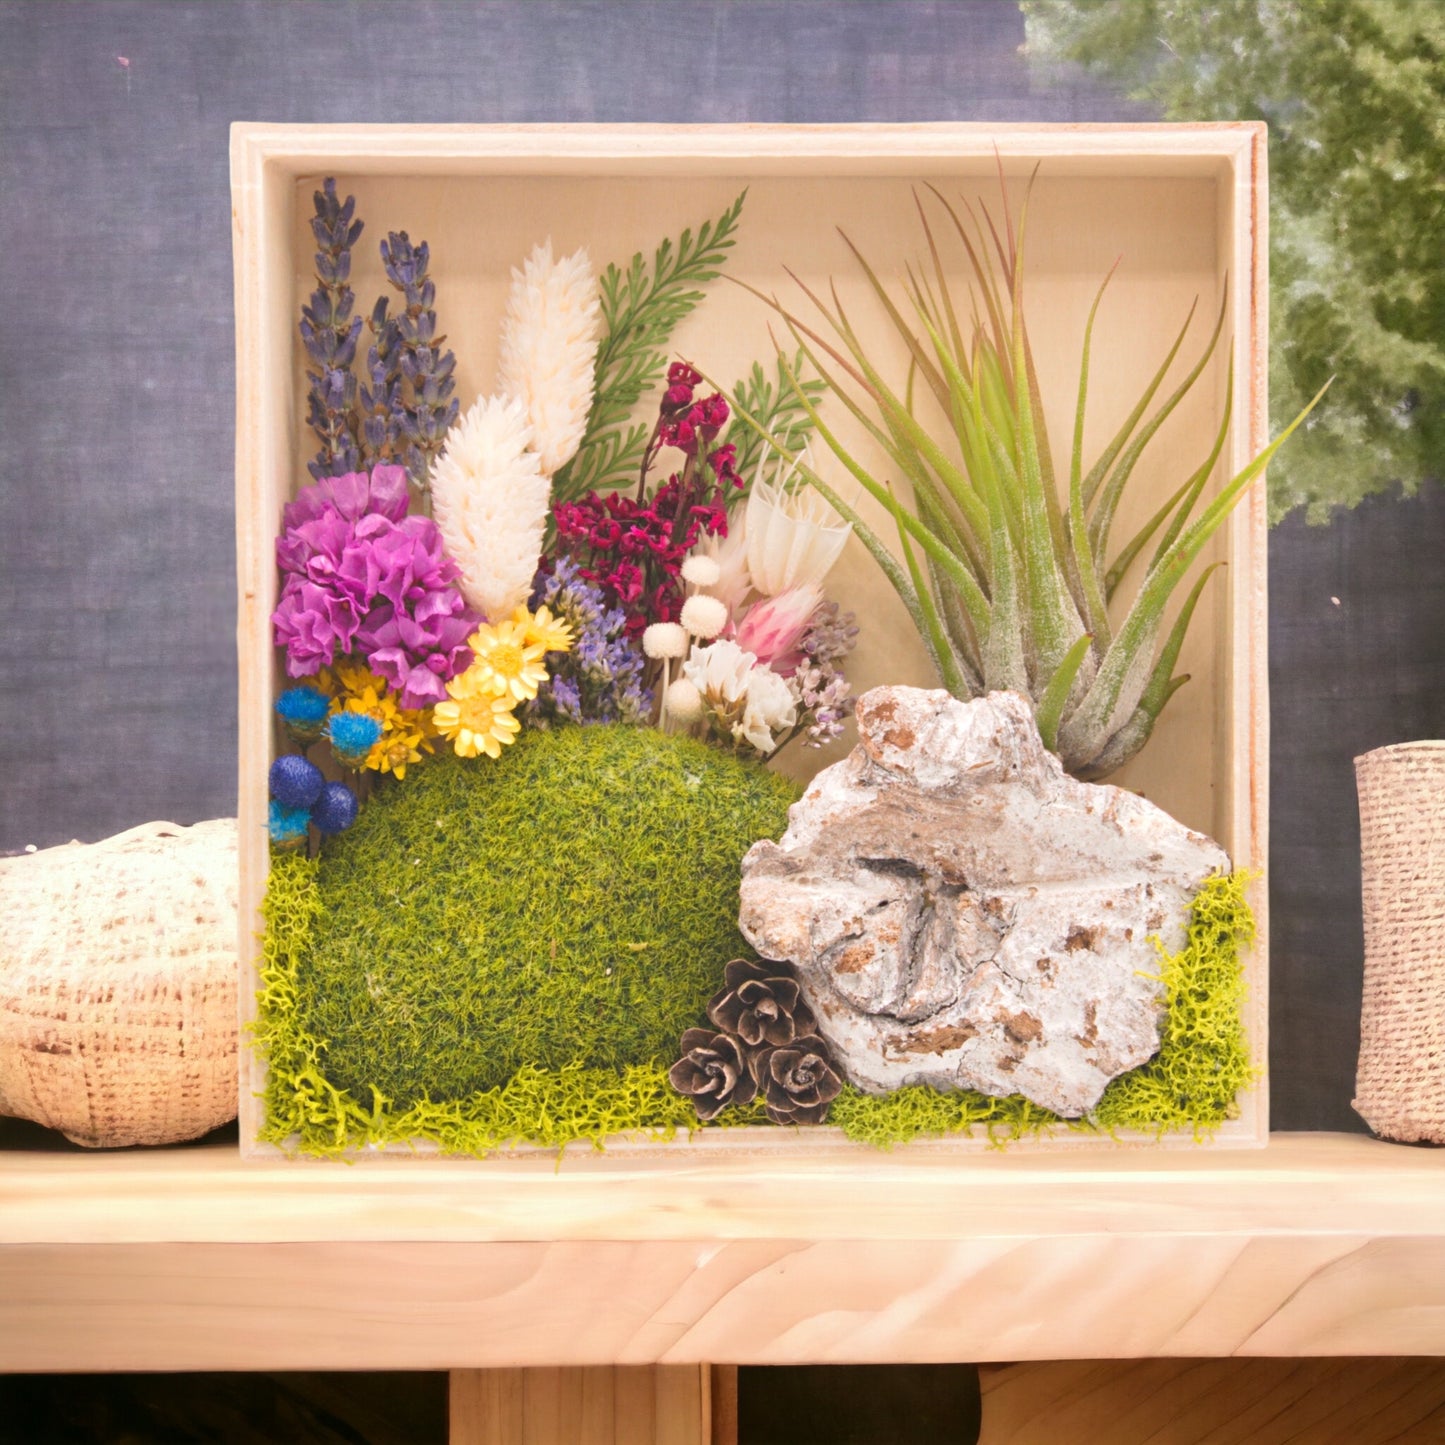 Wooden box frame filled with colourful dried flowers, moss, wood and an airplant/tillandsia